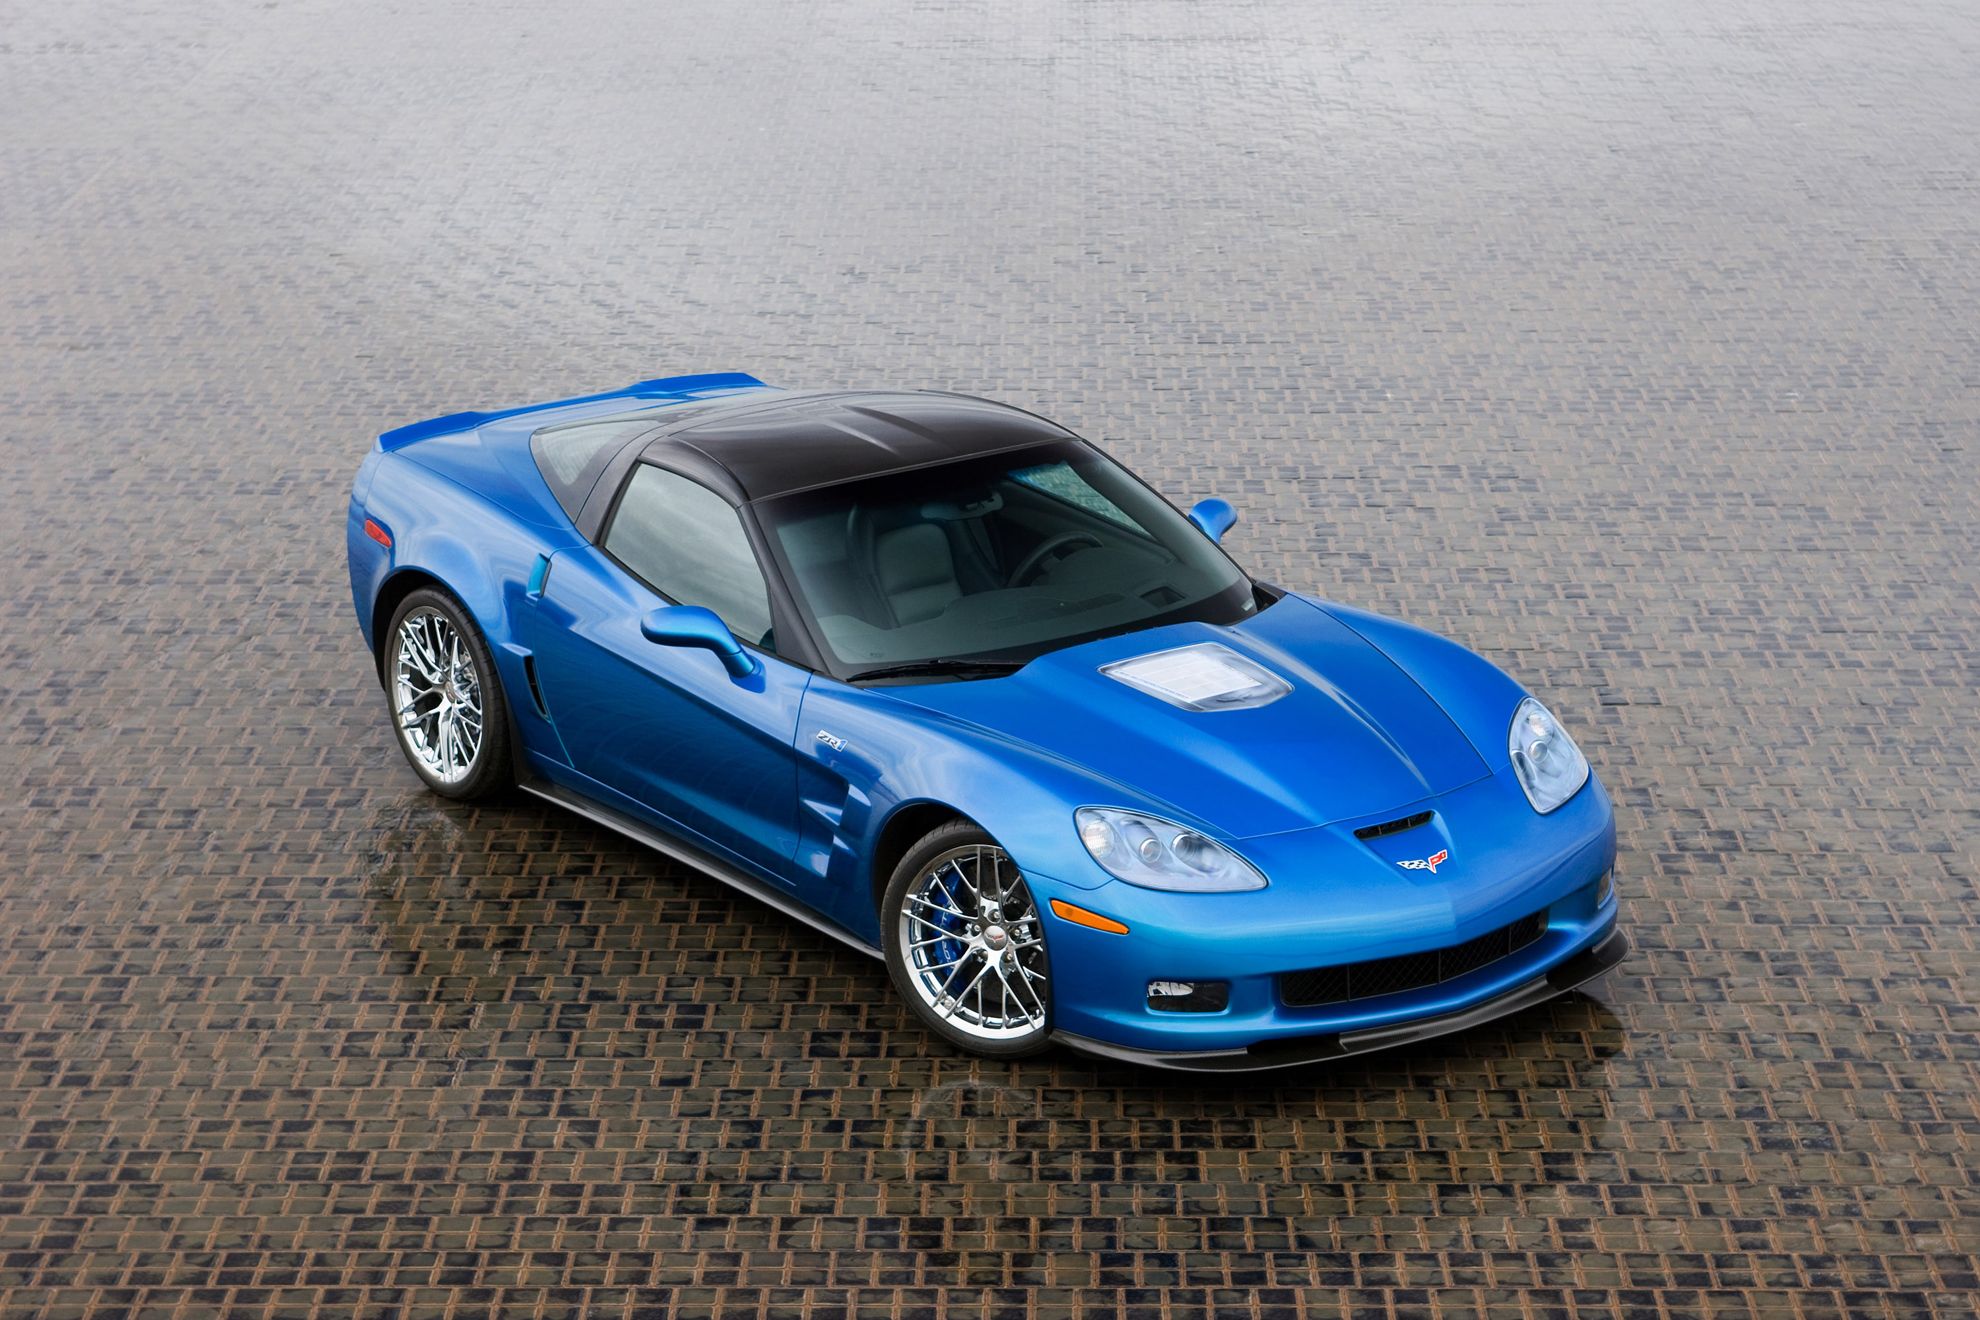 CHEVROLET TO OVERSEE RESTORATION OF HISTORIC CORVETTES